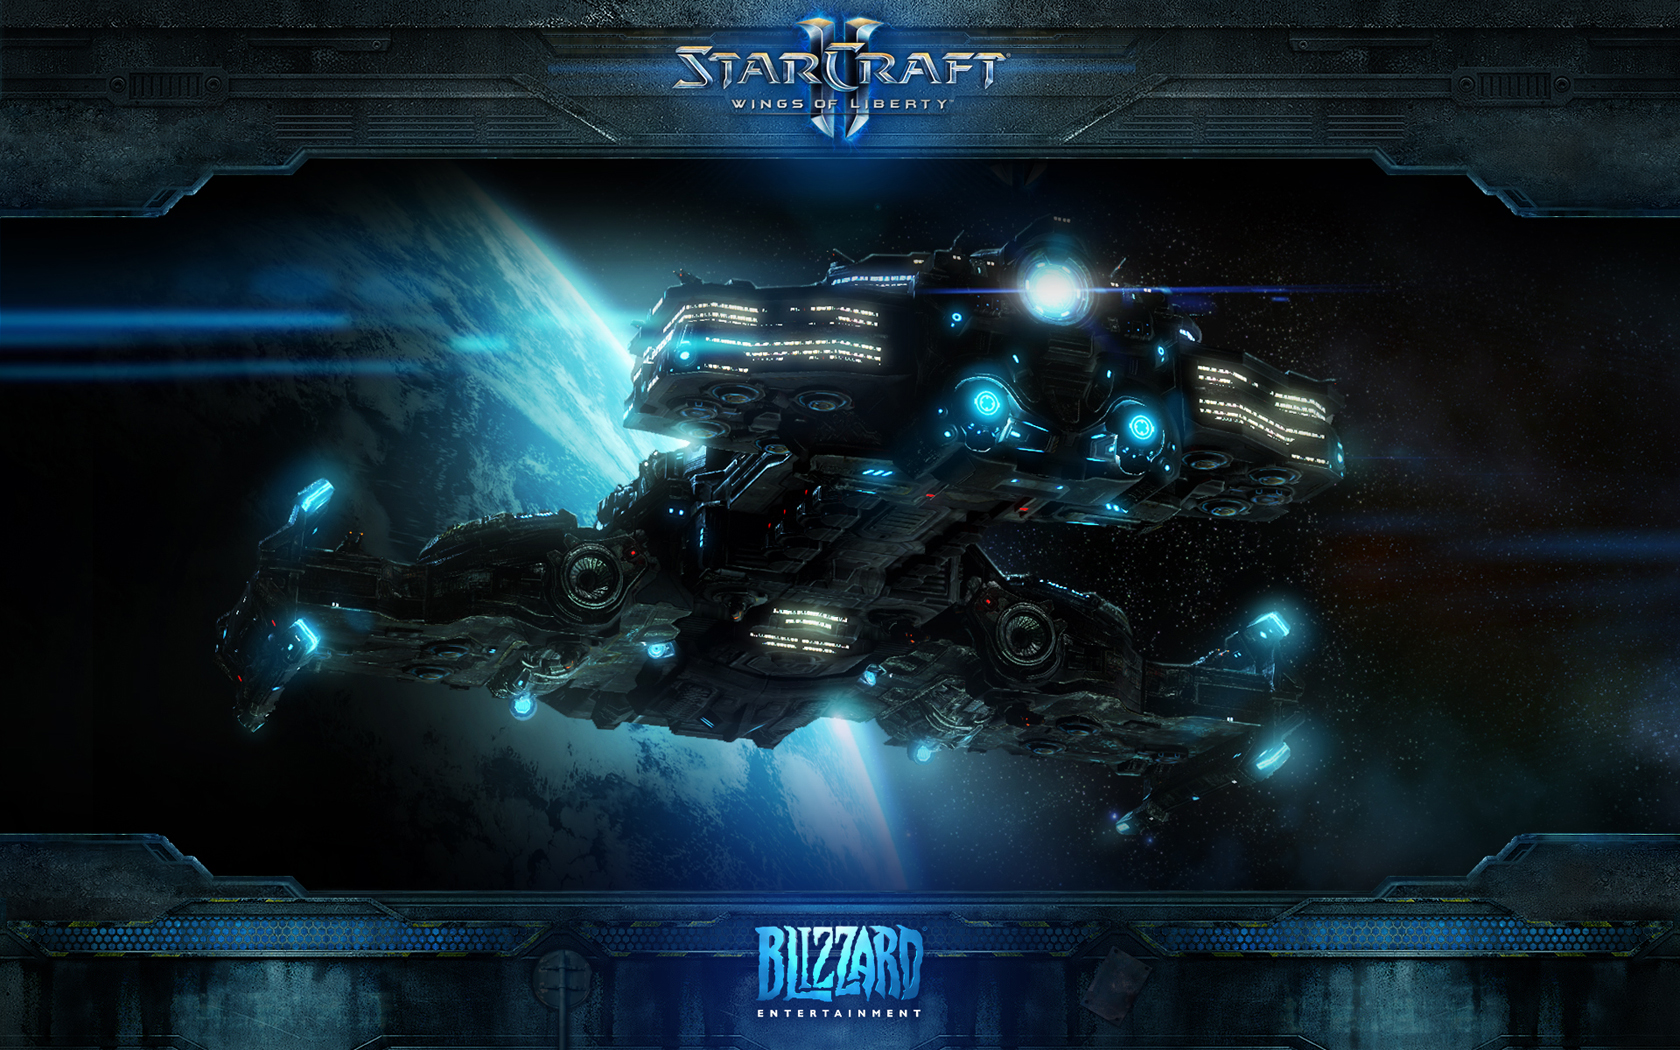 General 1680x1050 video games Starcraft II hyperion StarCraft II: Wings of Liberty StarCraft II : Heart Of The Swarm Starcraft II: Legacy of the Void Blizzard Entertainment battle.net spaceship space video game art